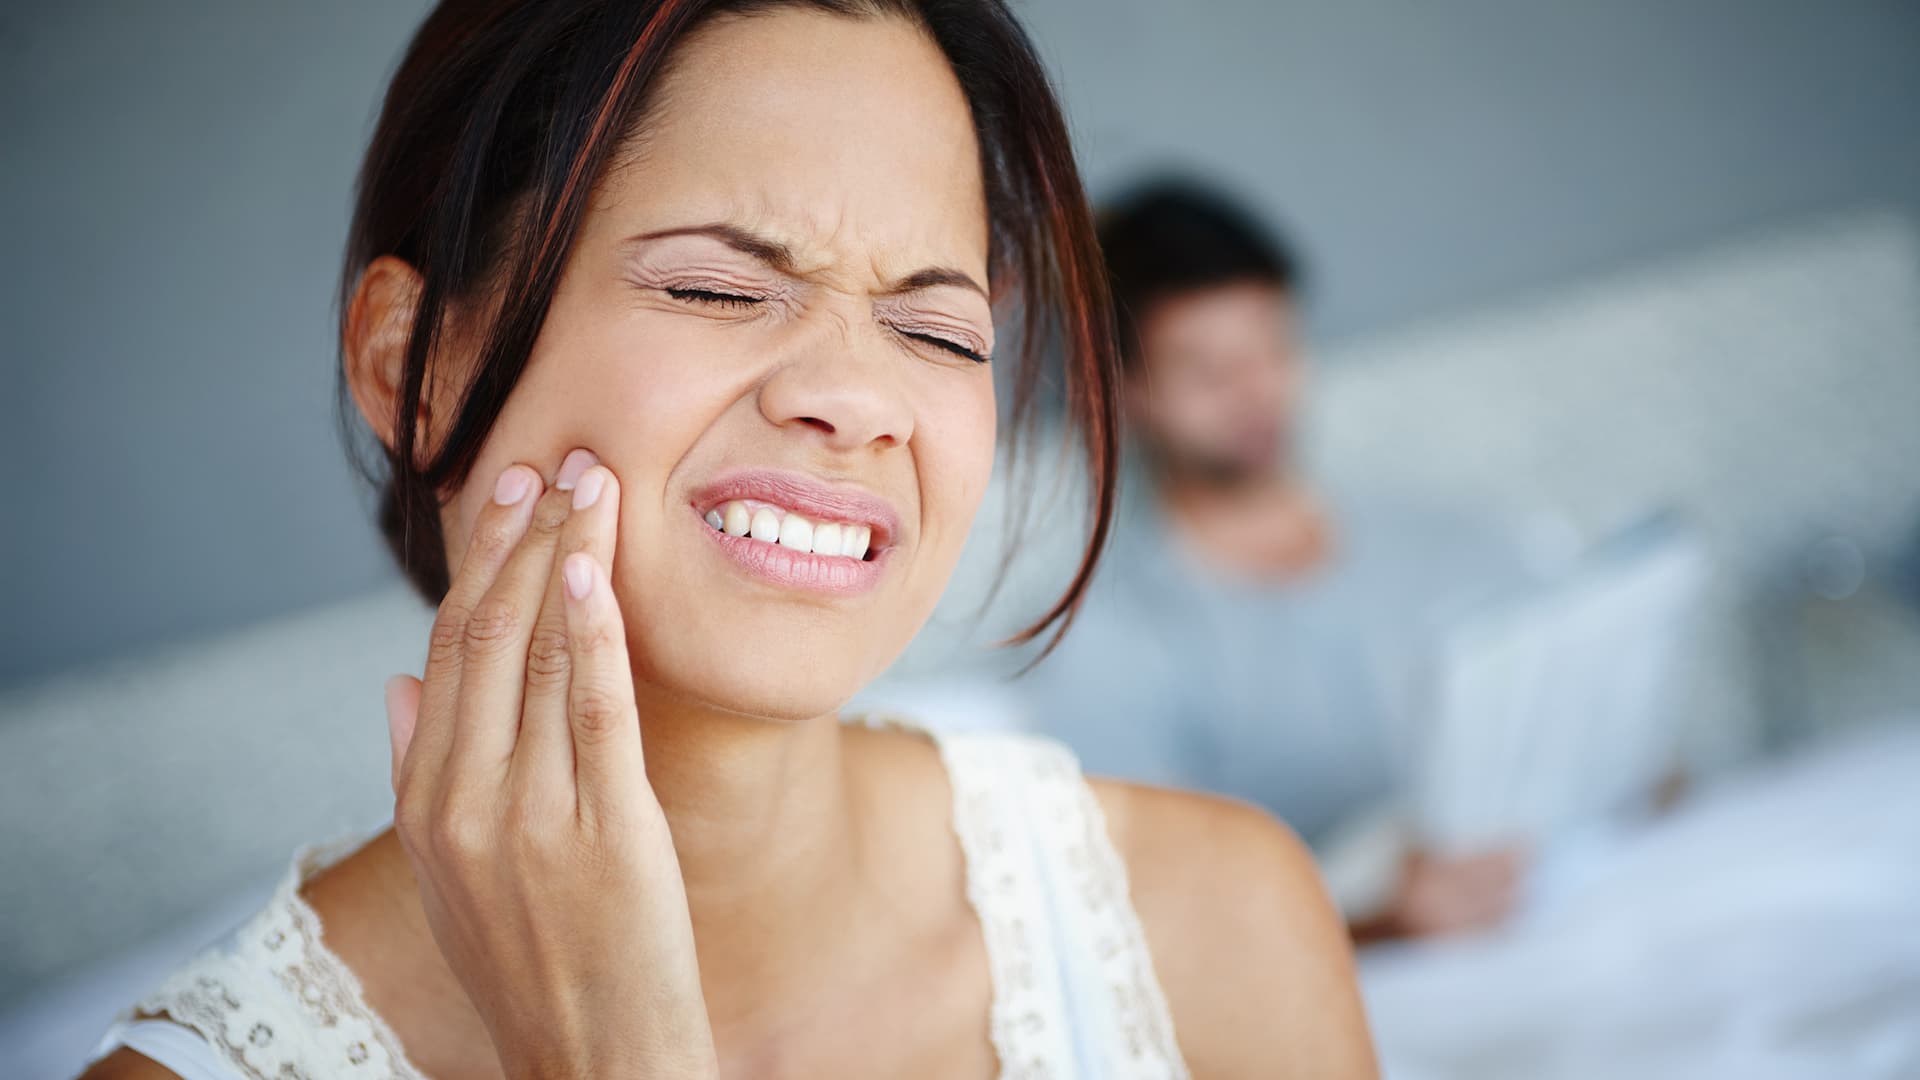 Why Does TMJ Pain Only Hurt on One Side?